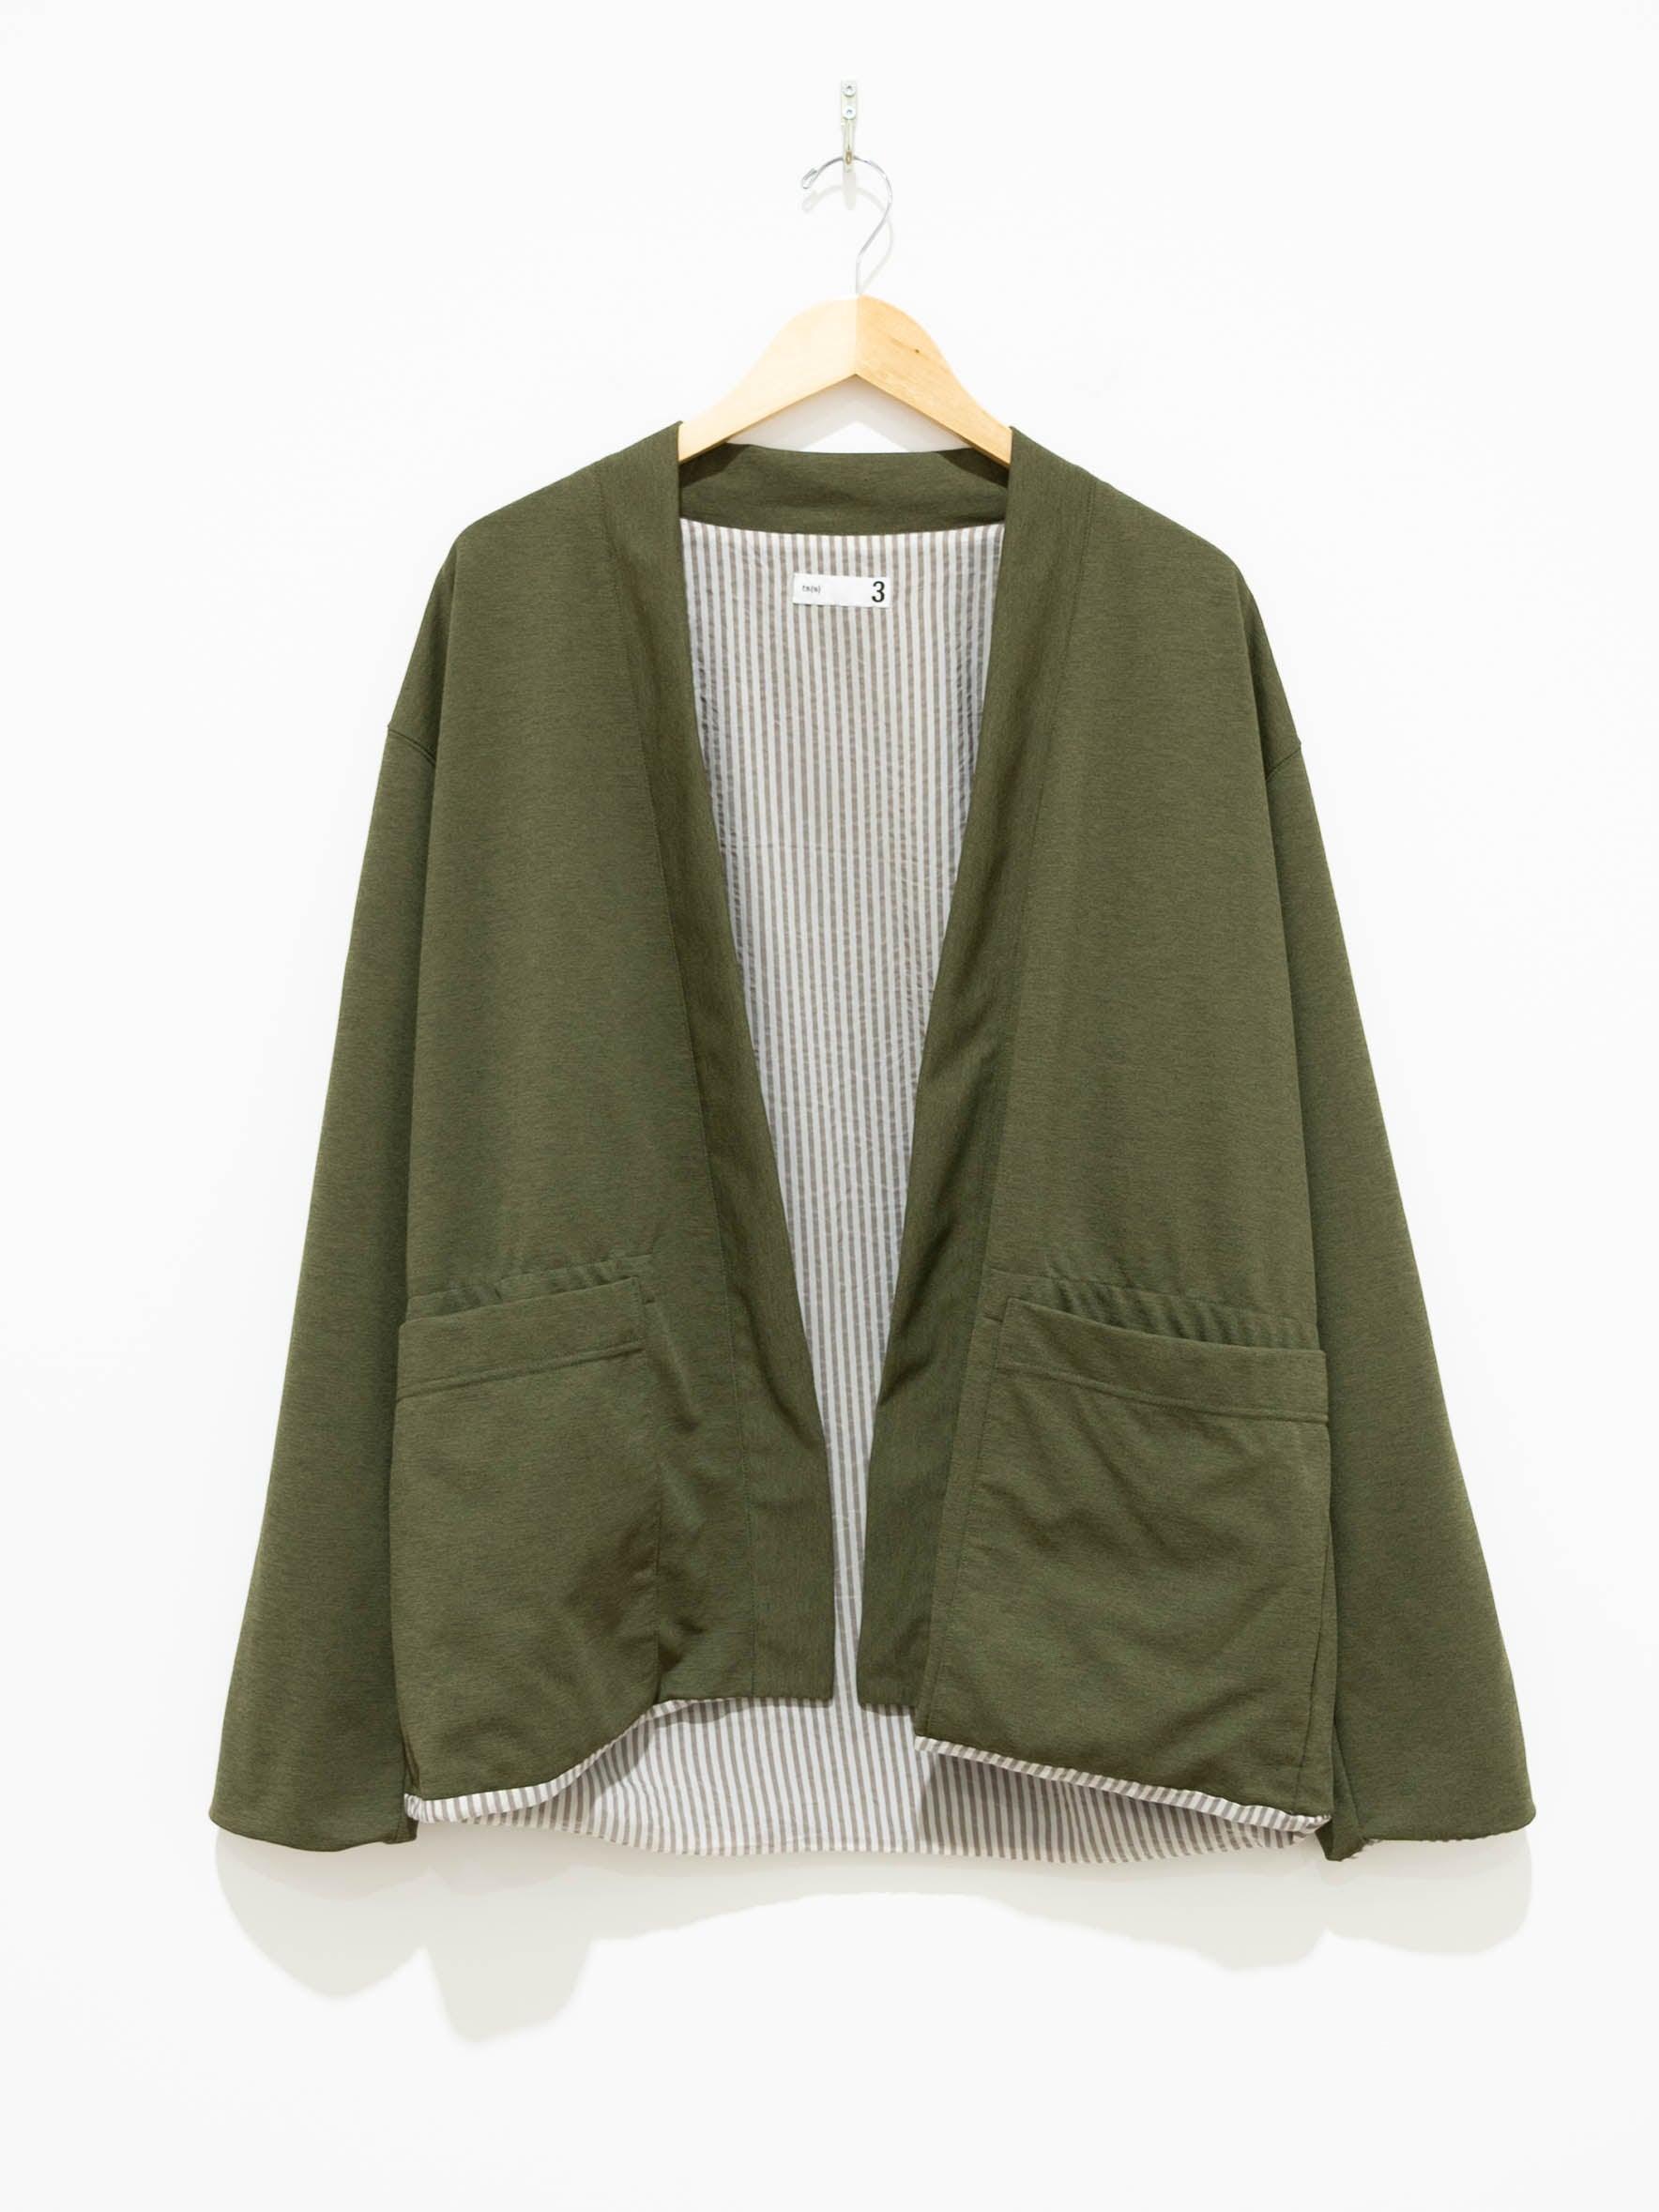 Namu Shop - ts(s) Poly Pique Jersey Lined Easy Cardigan - Olive